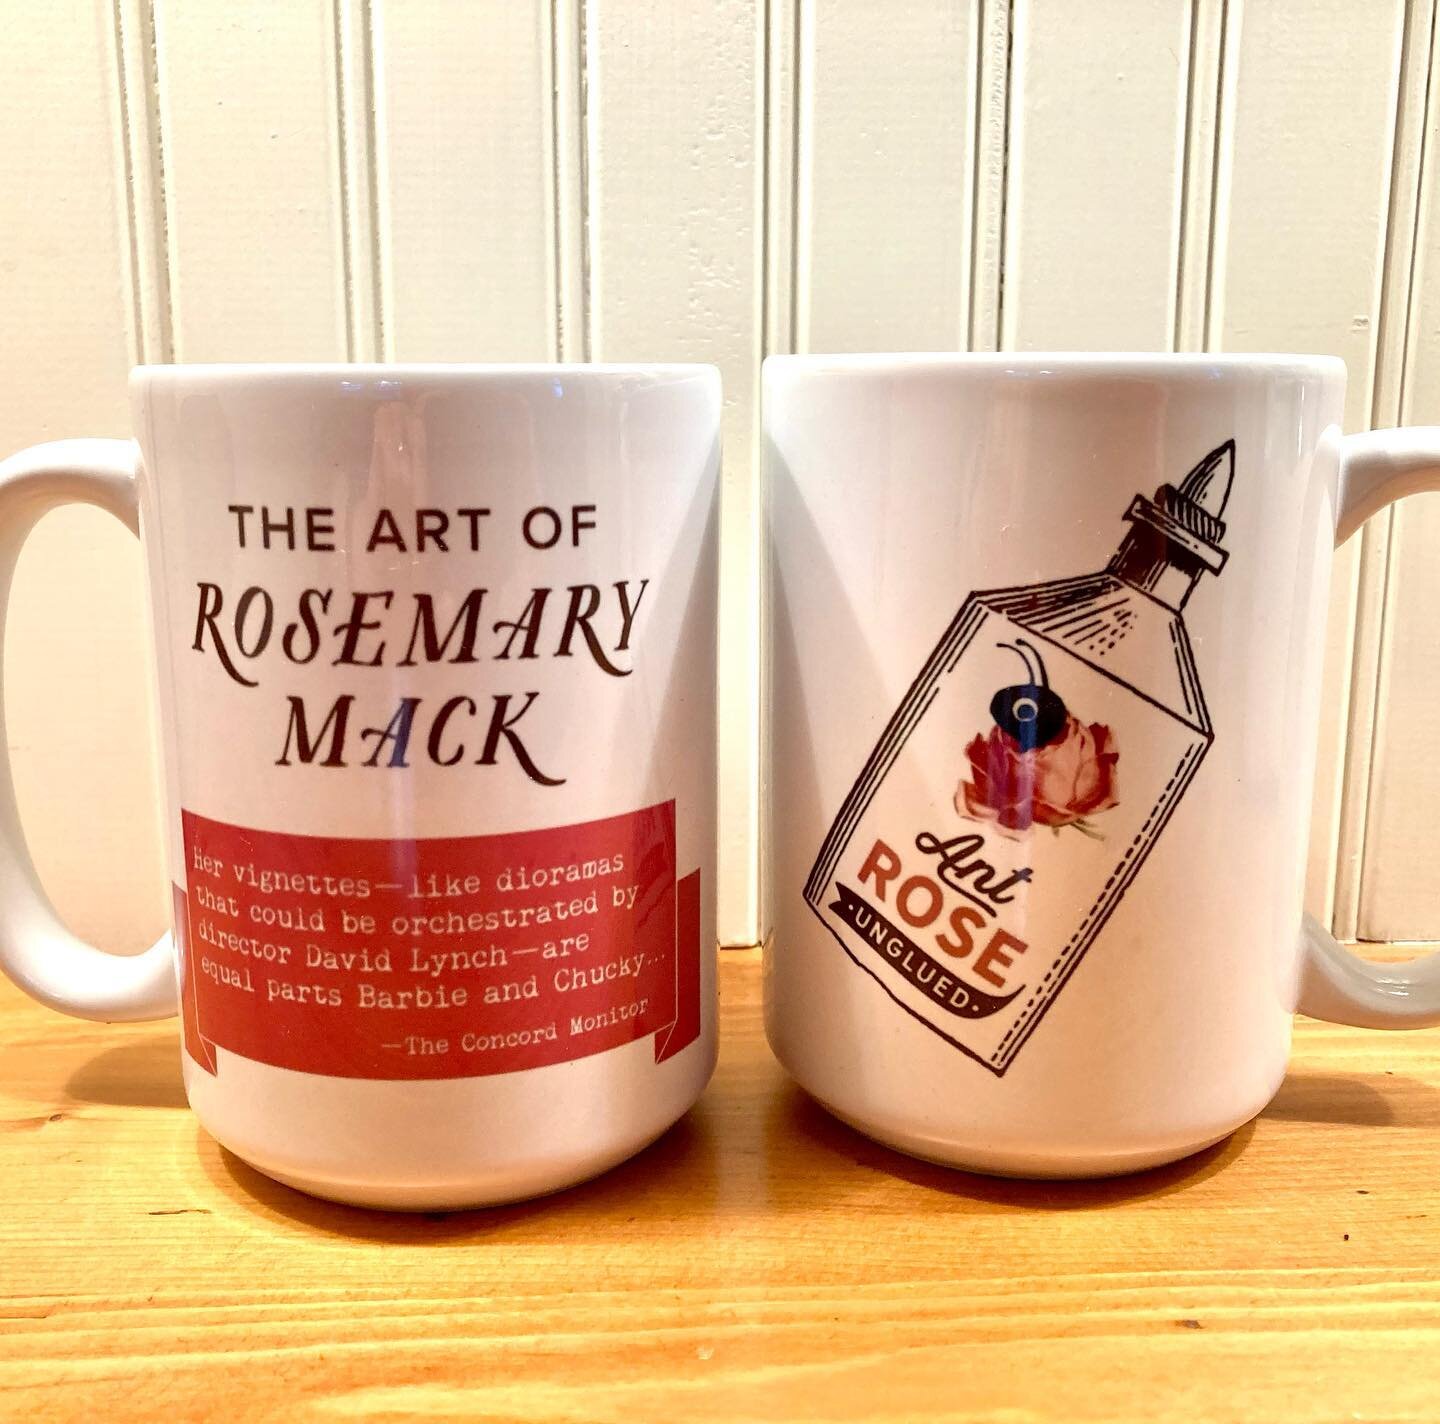 The real Della Pond just sent me the coolest gift! Not just my logo but an excerpt from a review of the Kimball Jenkins show a mere two weeks ago. We knew she was a fast woman but whoa baby&mdash;she&rsquo;s the best! #bffs #mugshot #dellapond #twinp